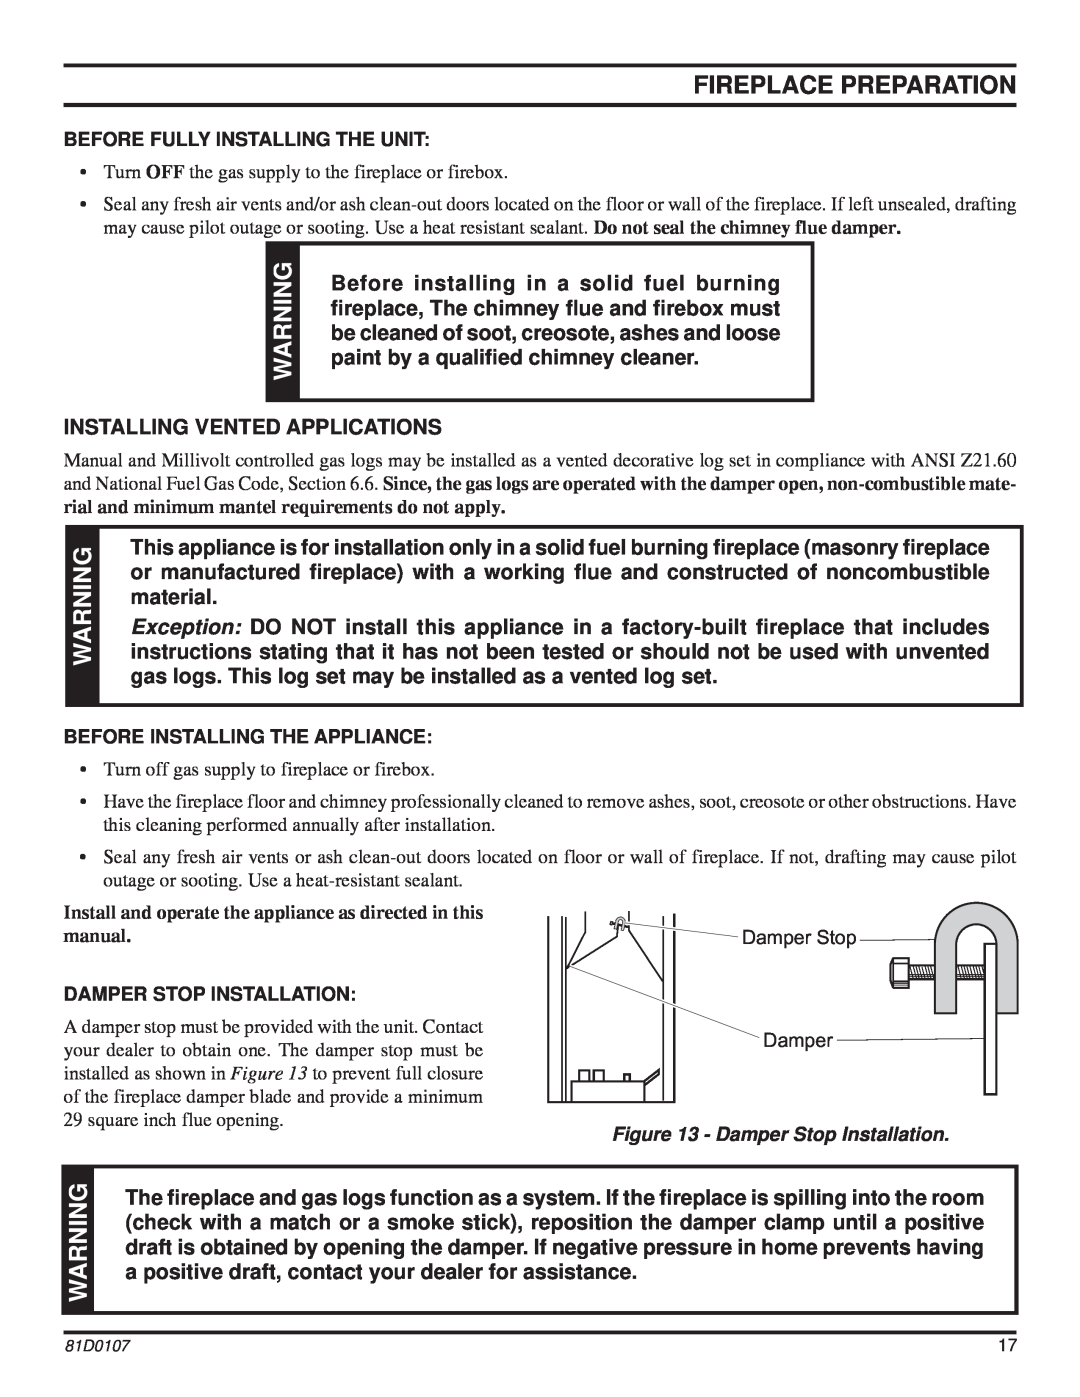 Monessen Hearth NB18, NB24 operating instructions Fireplace Preparation 